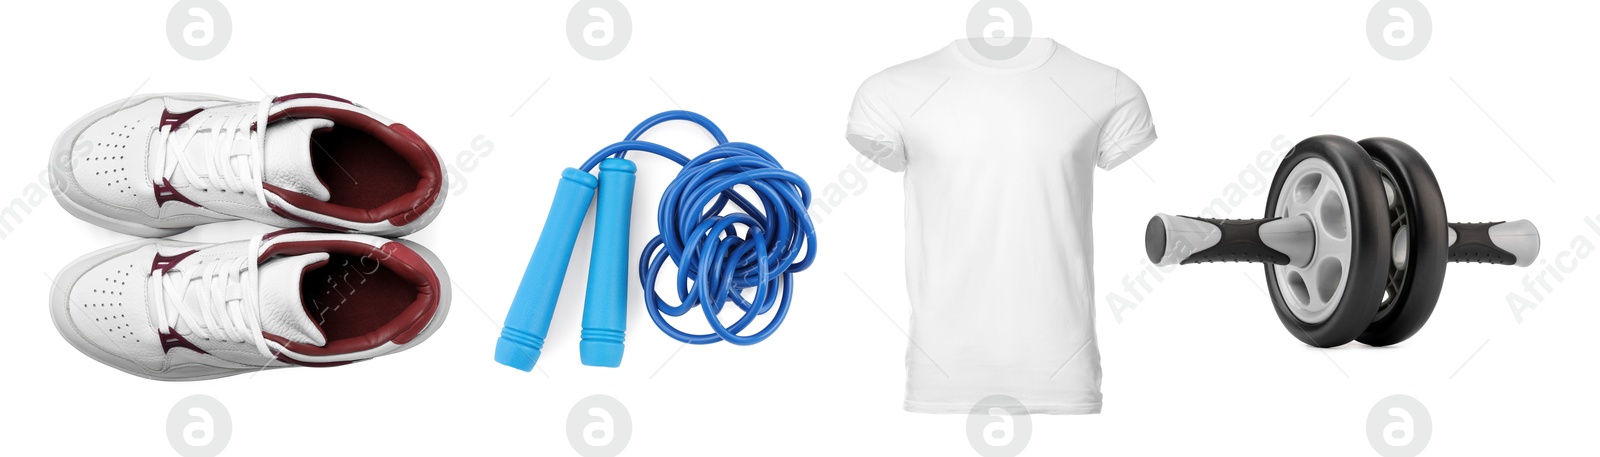 Image of Sport equipment, t-shirt and sneakers isolated on white, set